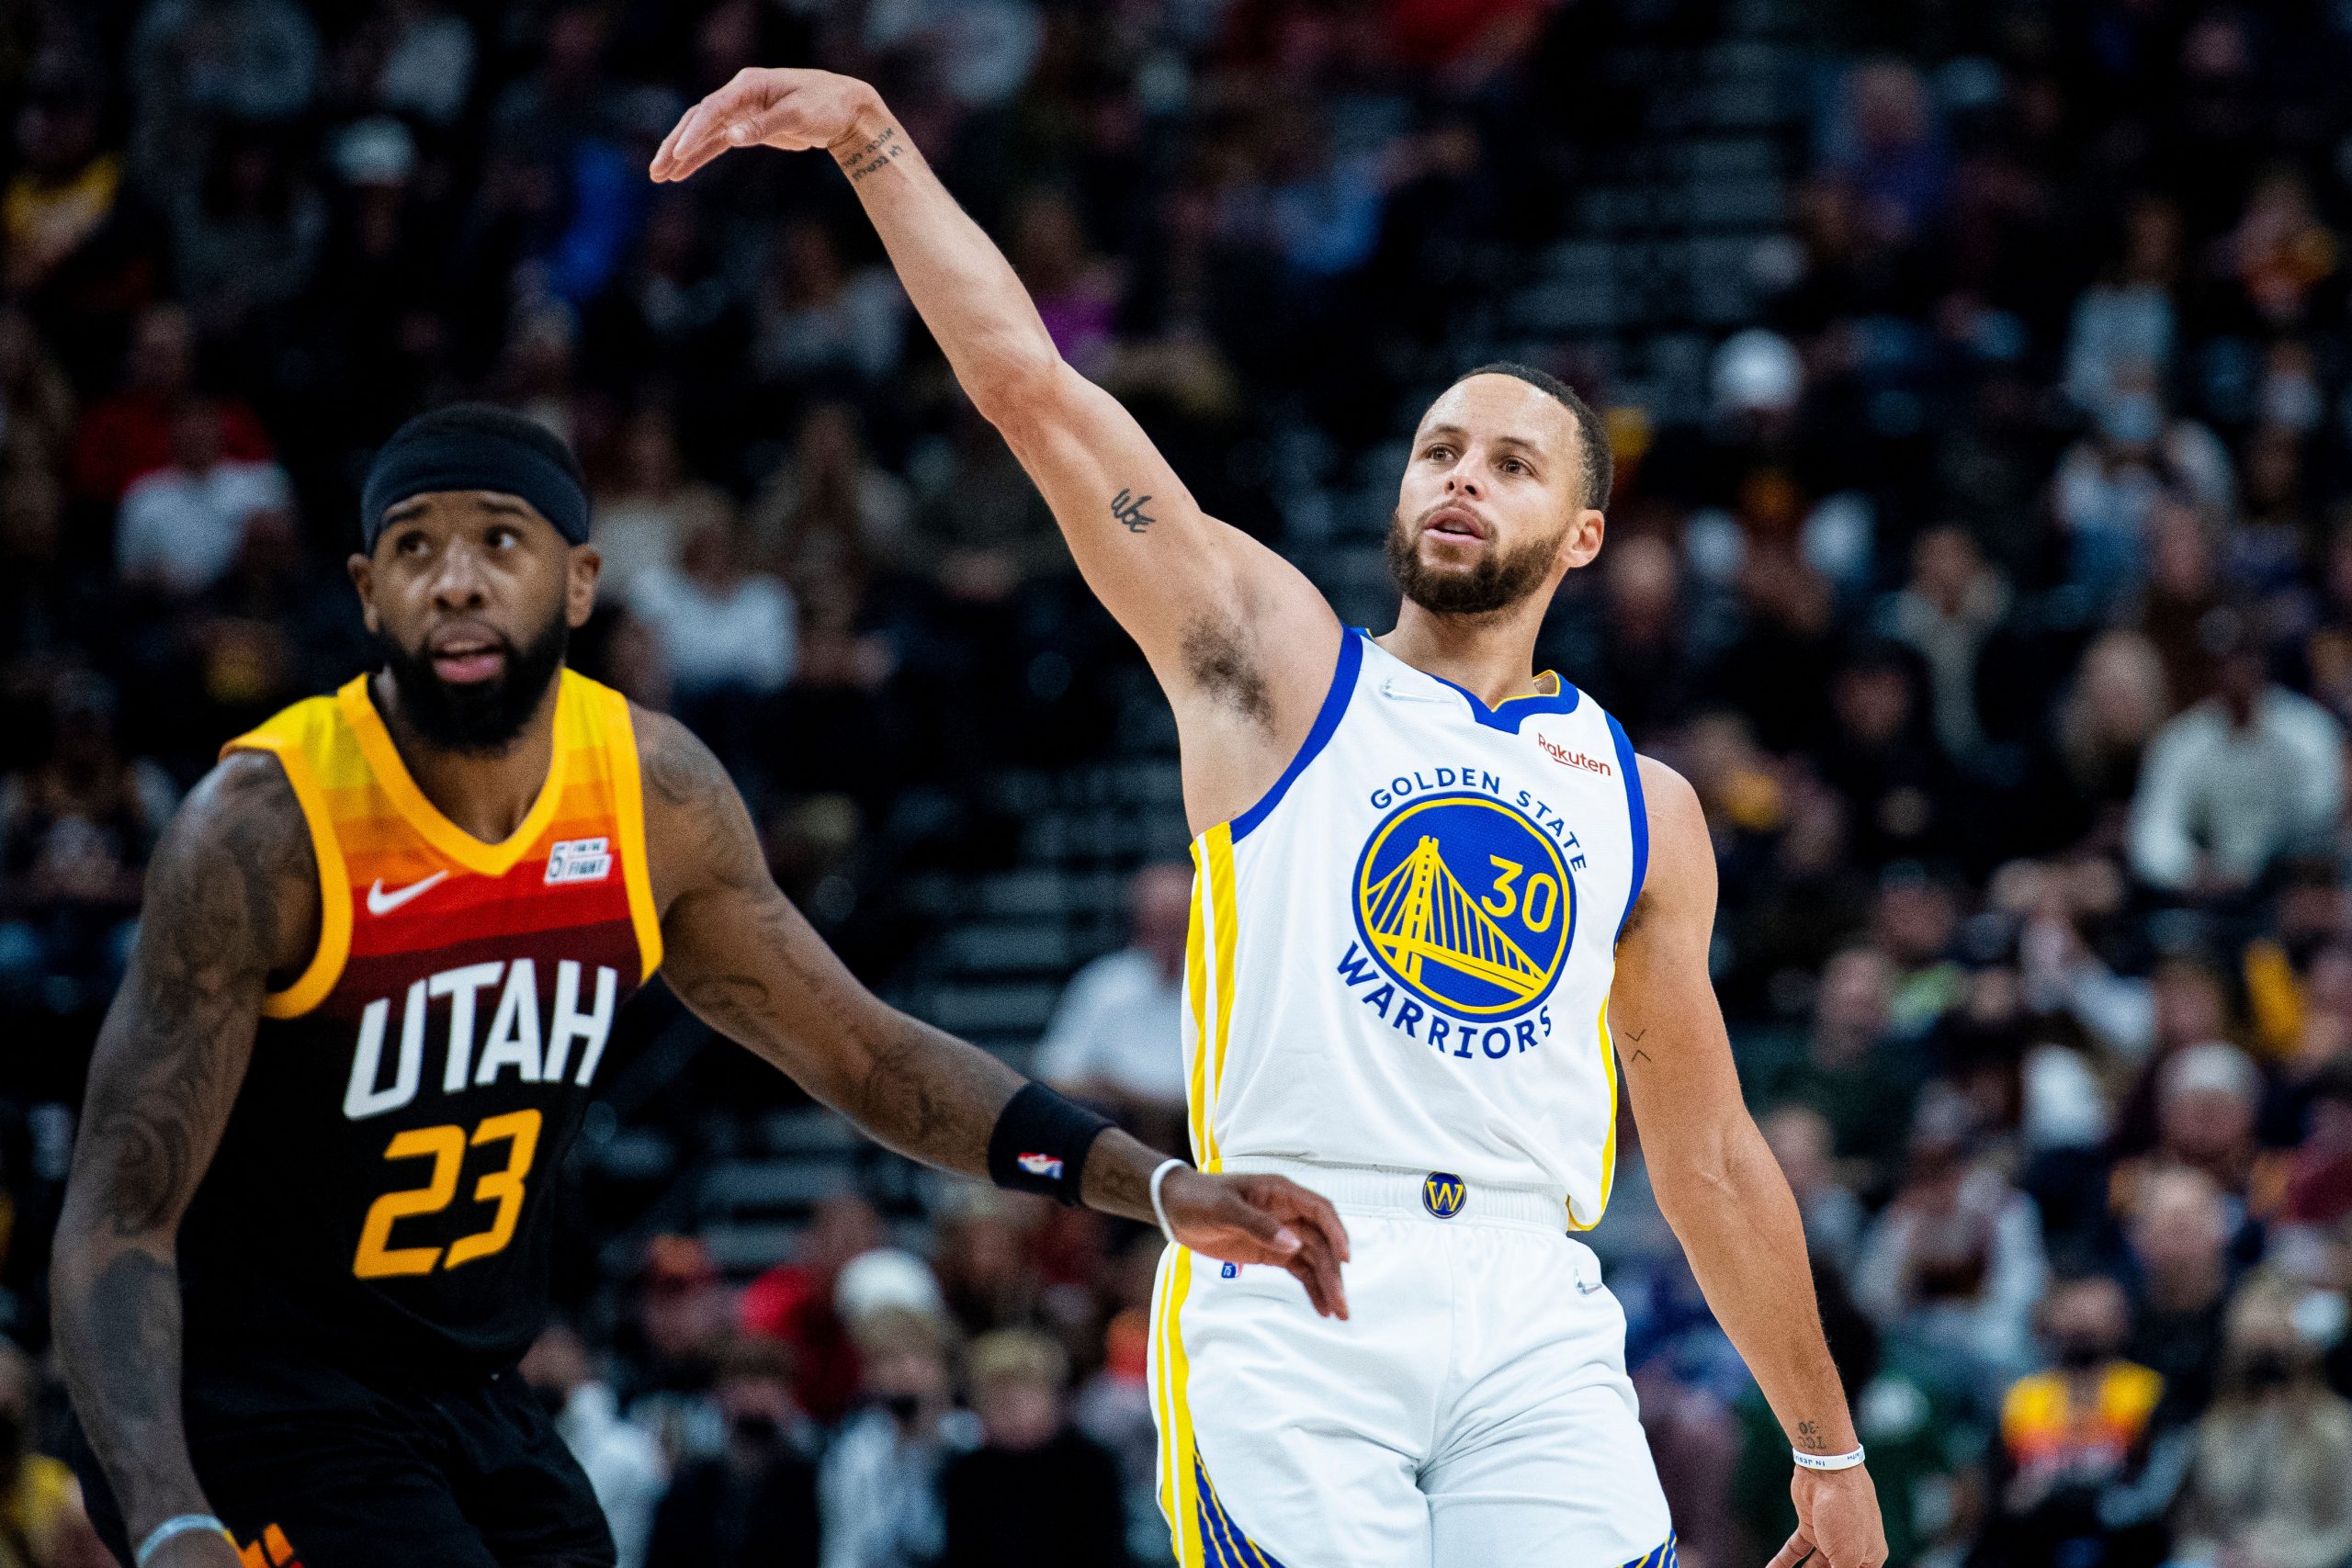 NBA: Curry breaks own 3-pointer record in Warriors 123-116 win over Jazz